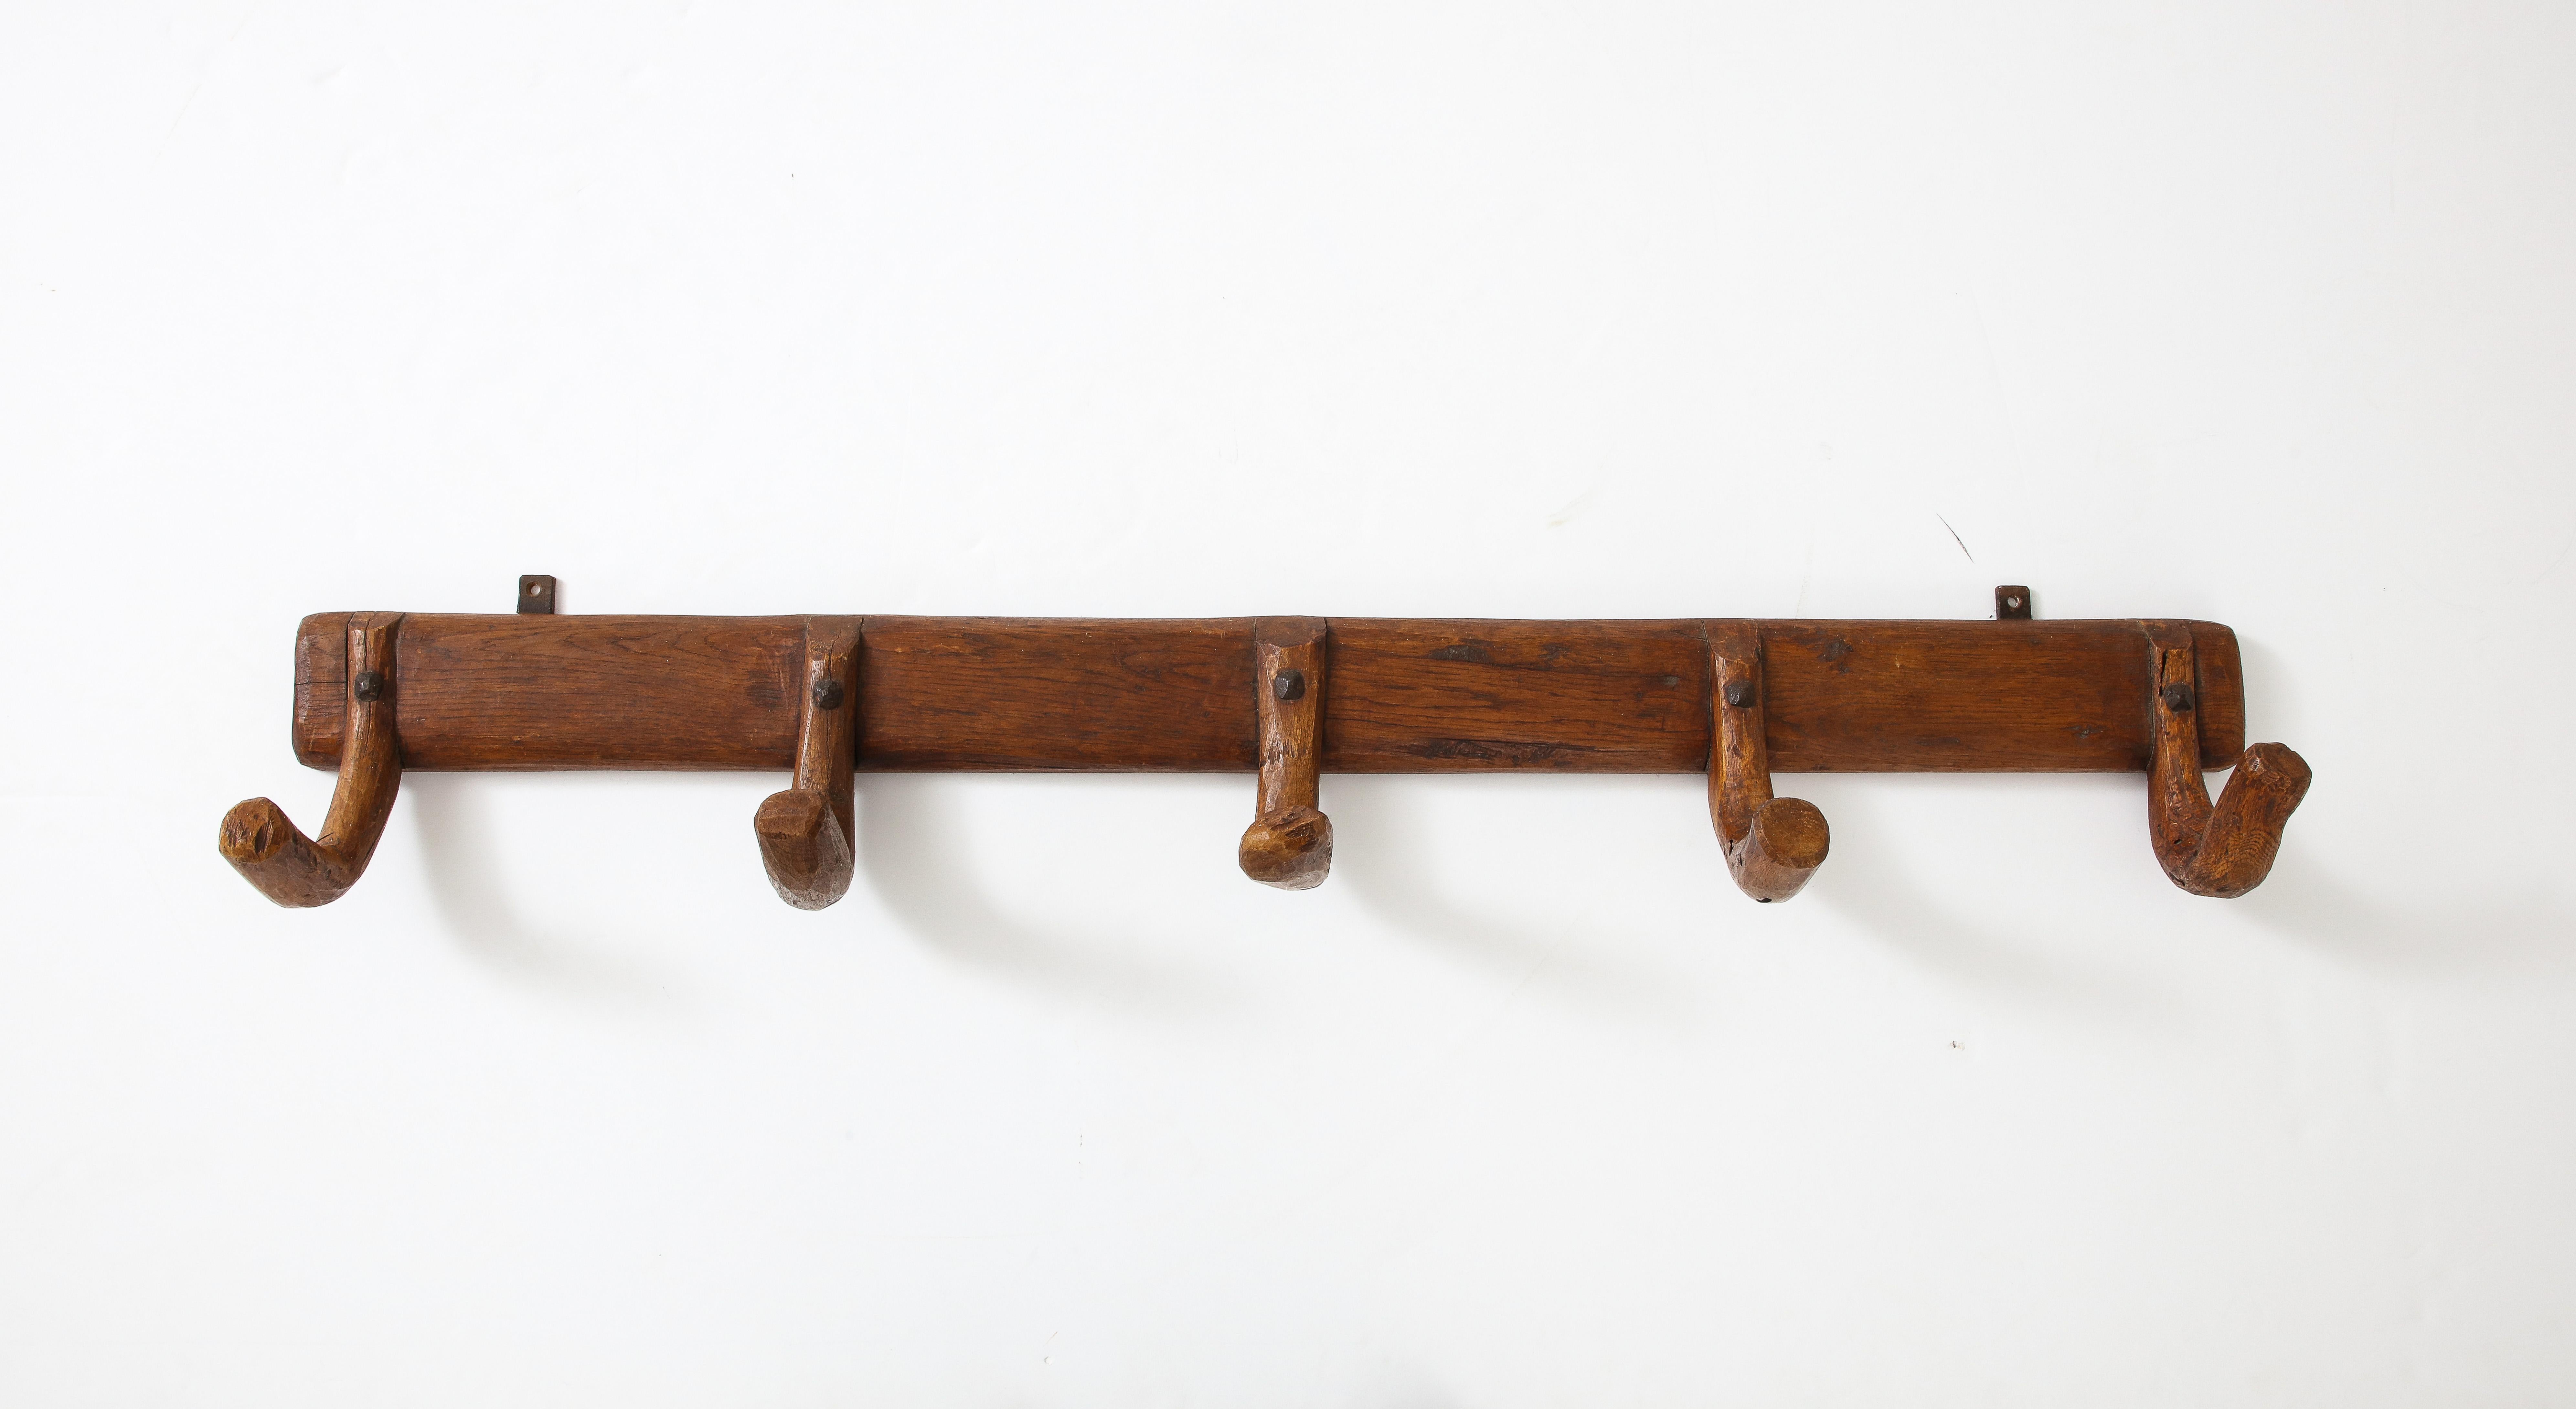 Wonderful Hand Made Carved Wood & Iron Coat Rack from the Pyrenees Mountains